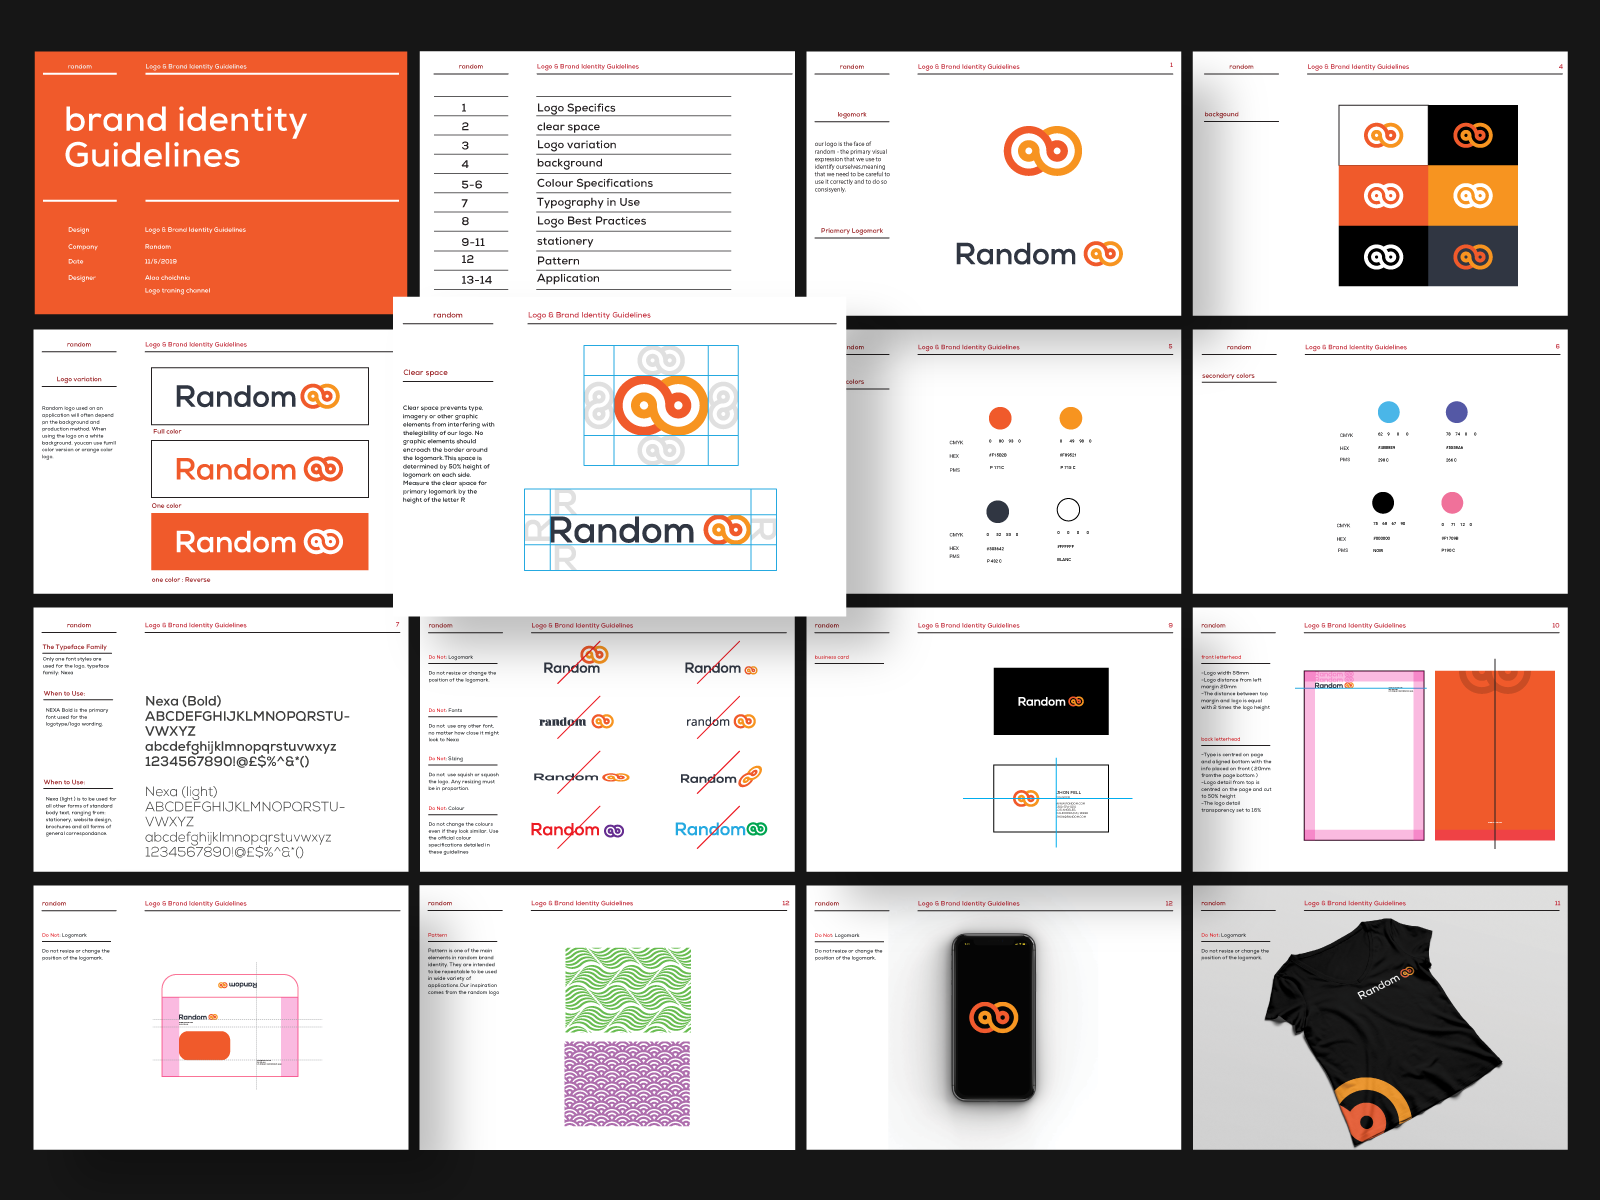 free-brand-identity-guidelines-template-by-alaa-choichnia-on-dribbble